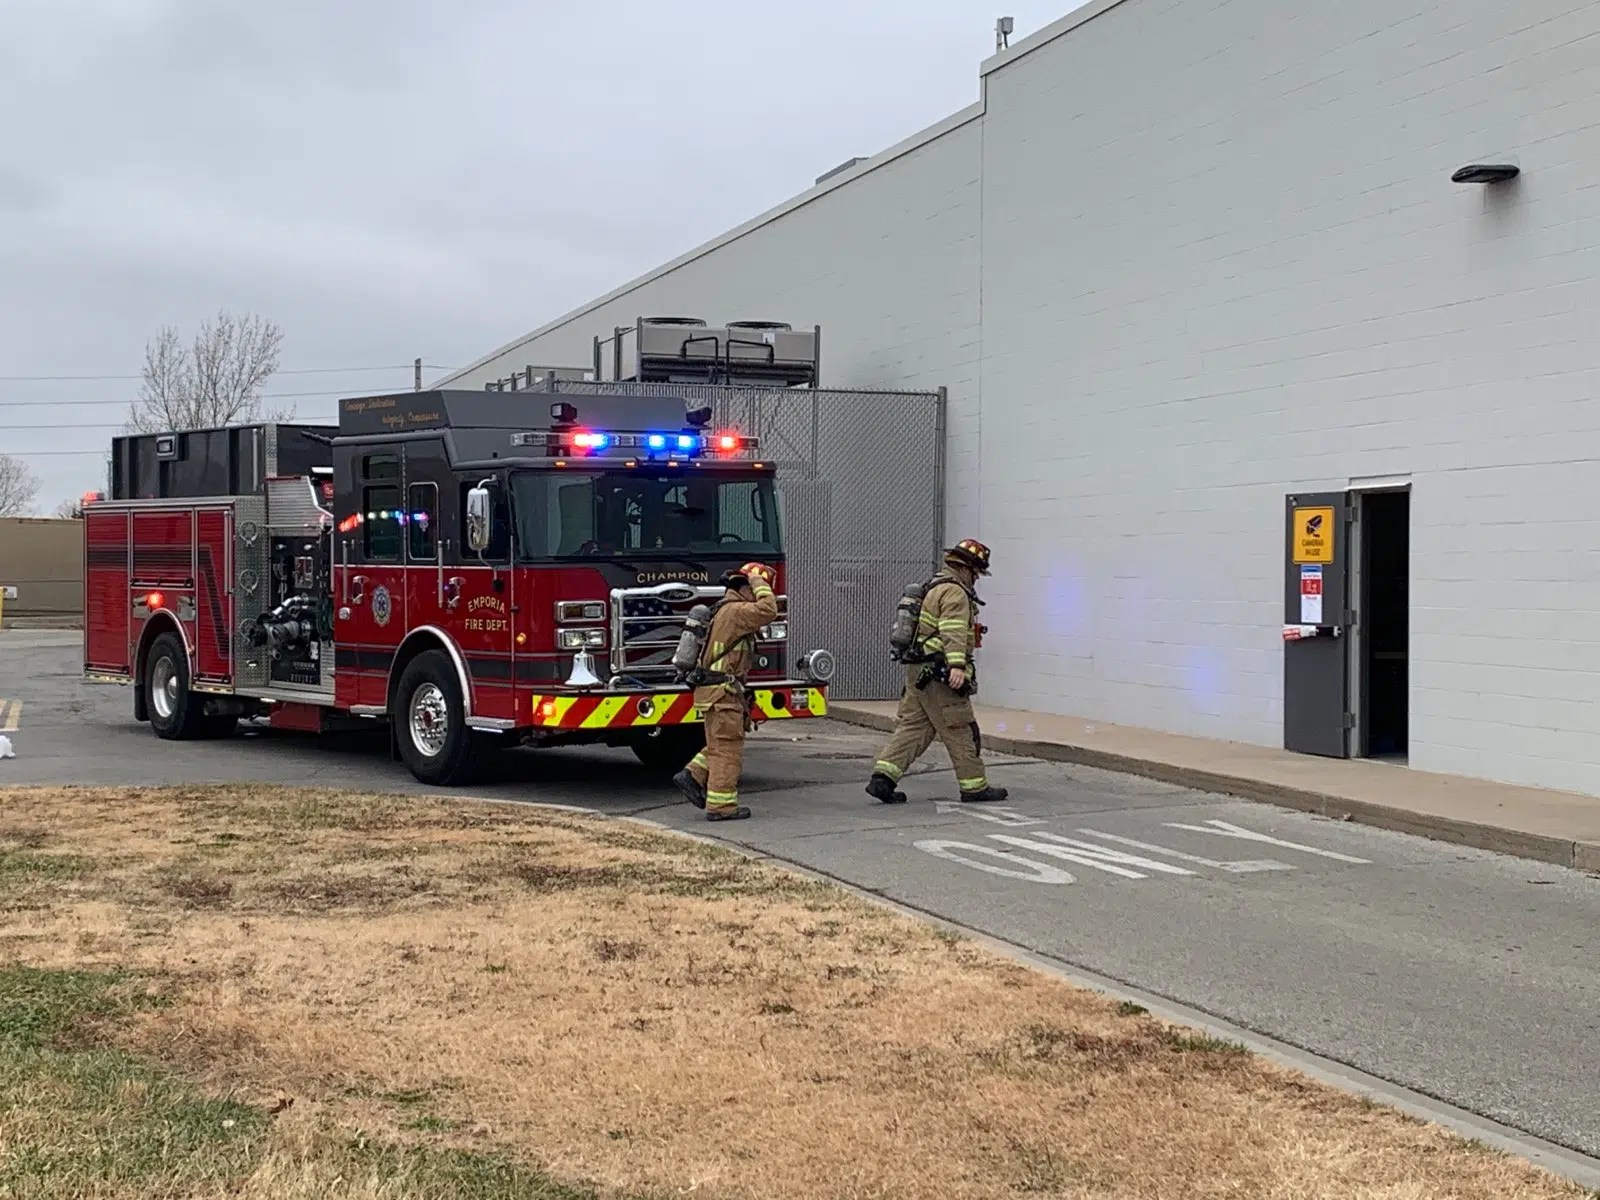 Apparent electrical issue the source of Saturday's fire call to Walmart